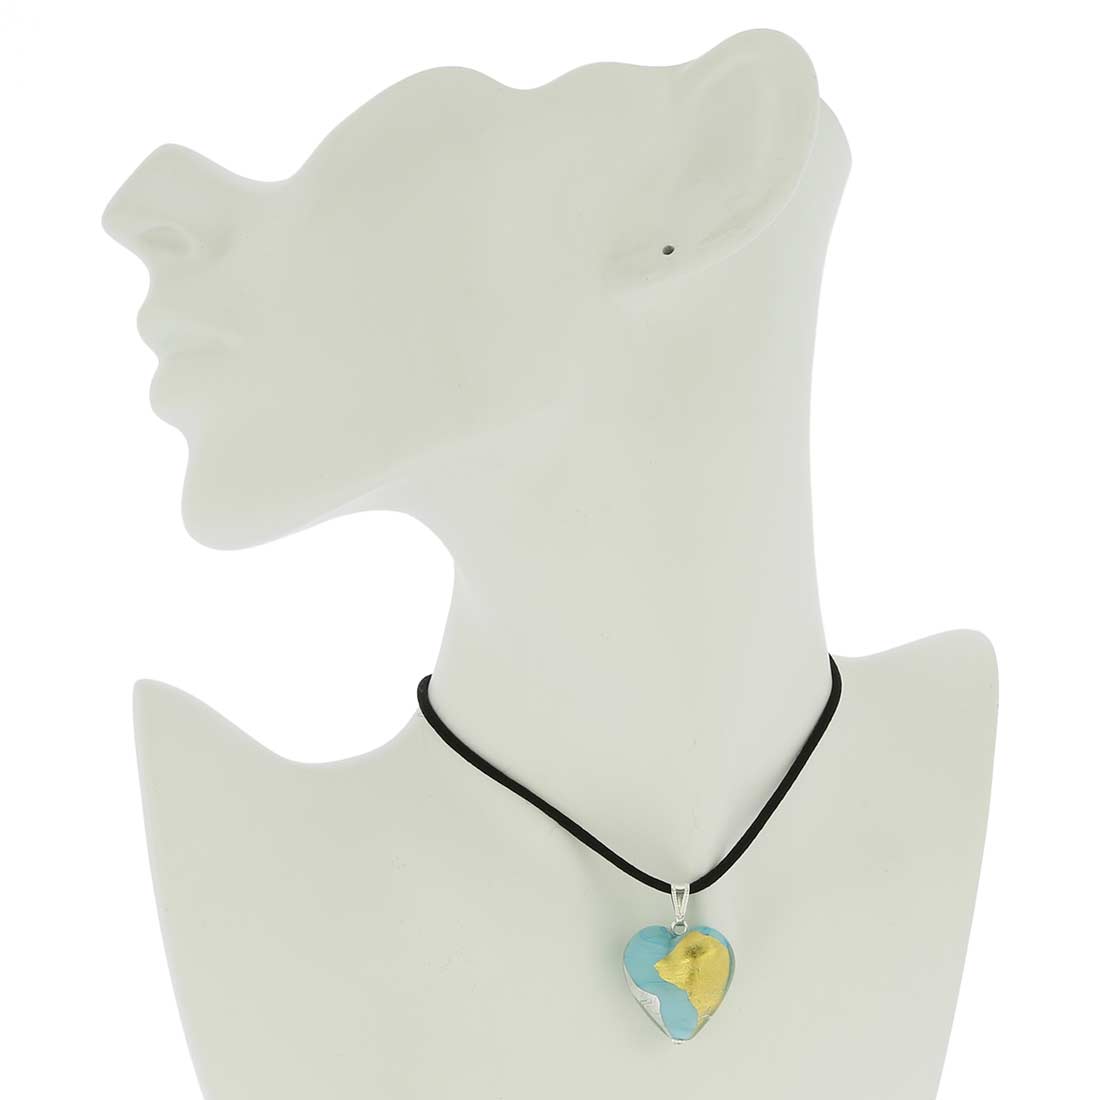 Murano Heart Pendant - Turquoise Gold and Silver